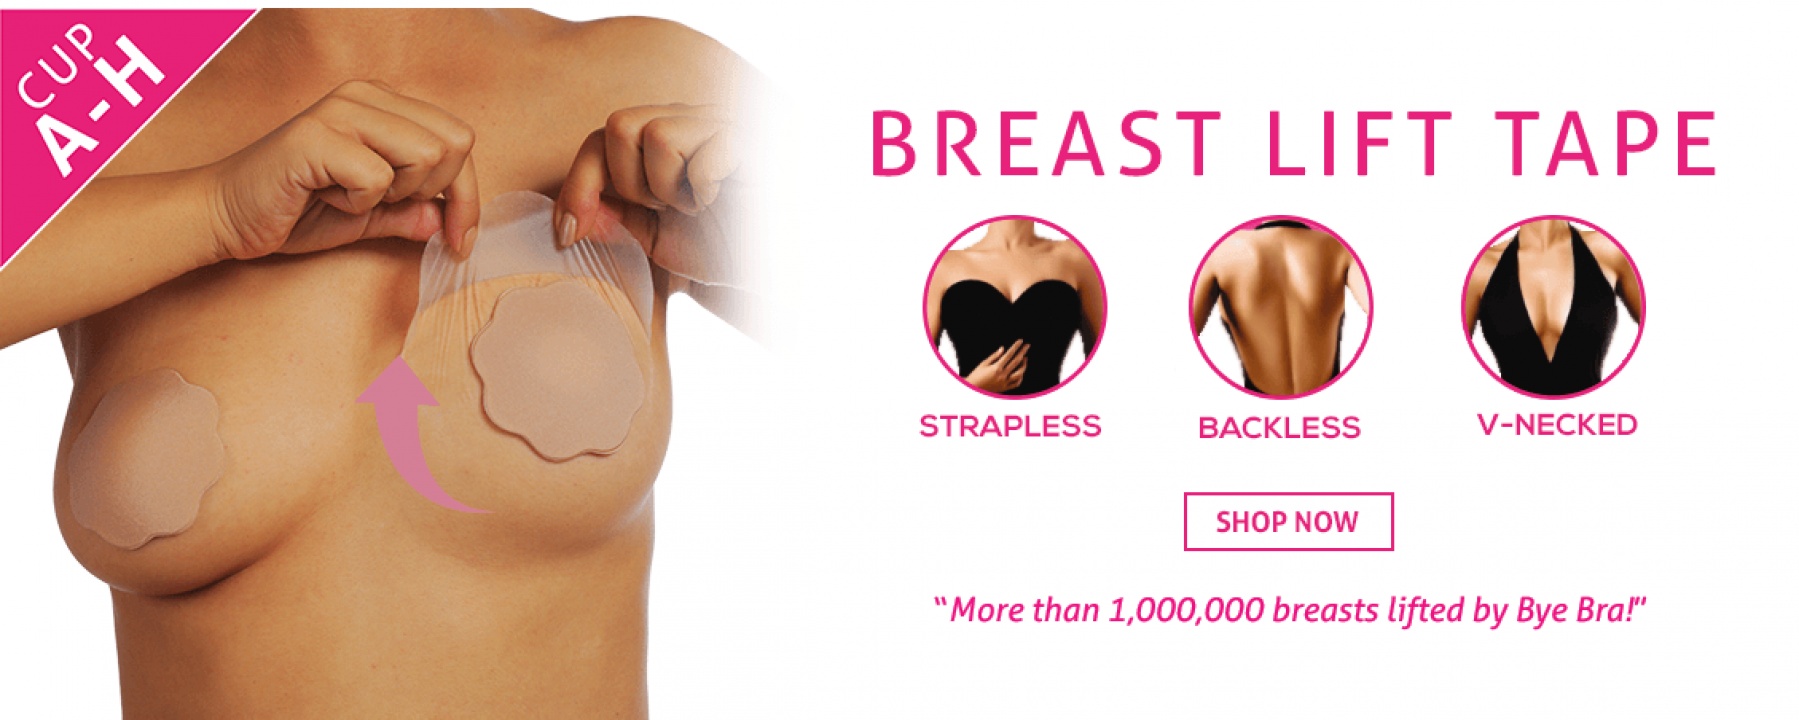 Adhesive breast lift—a relaxing experience for the women